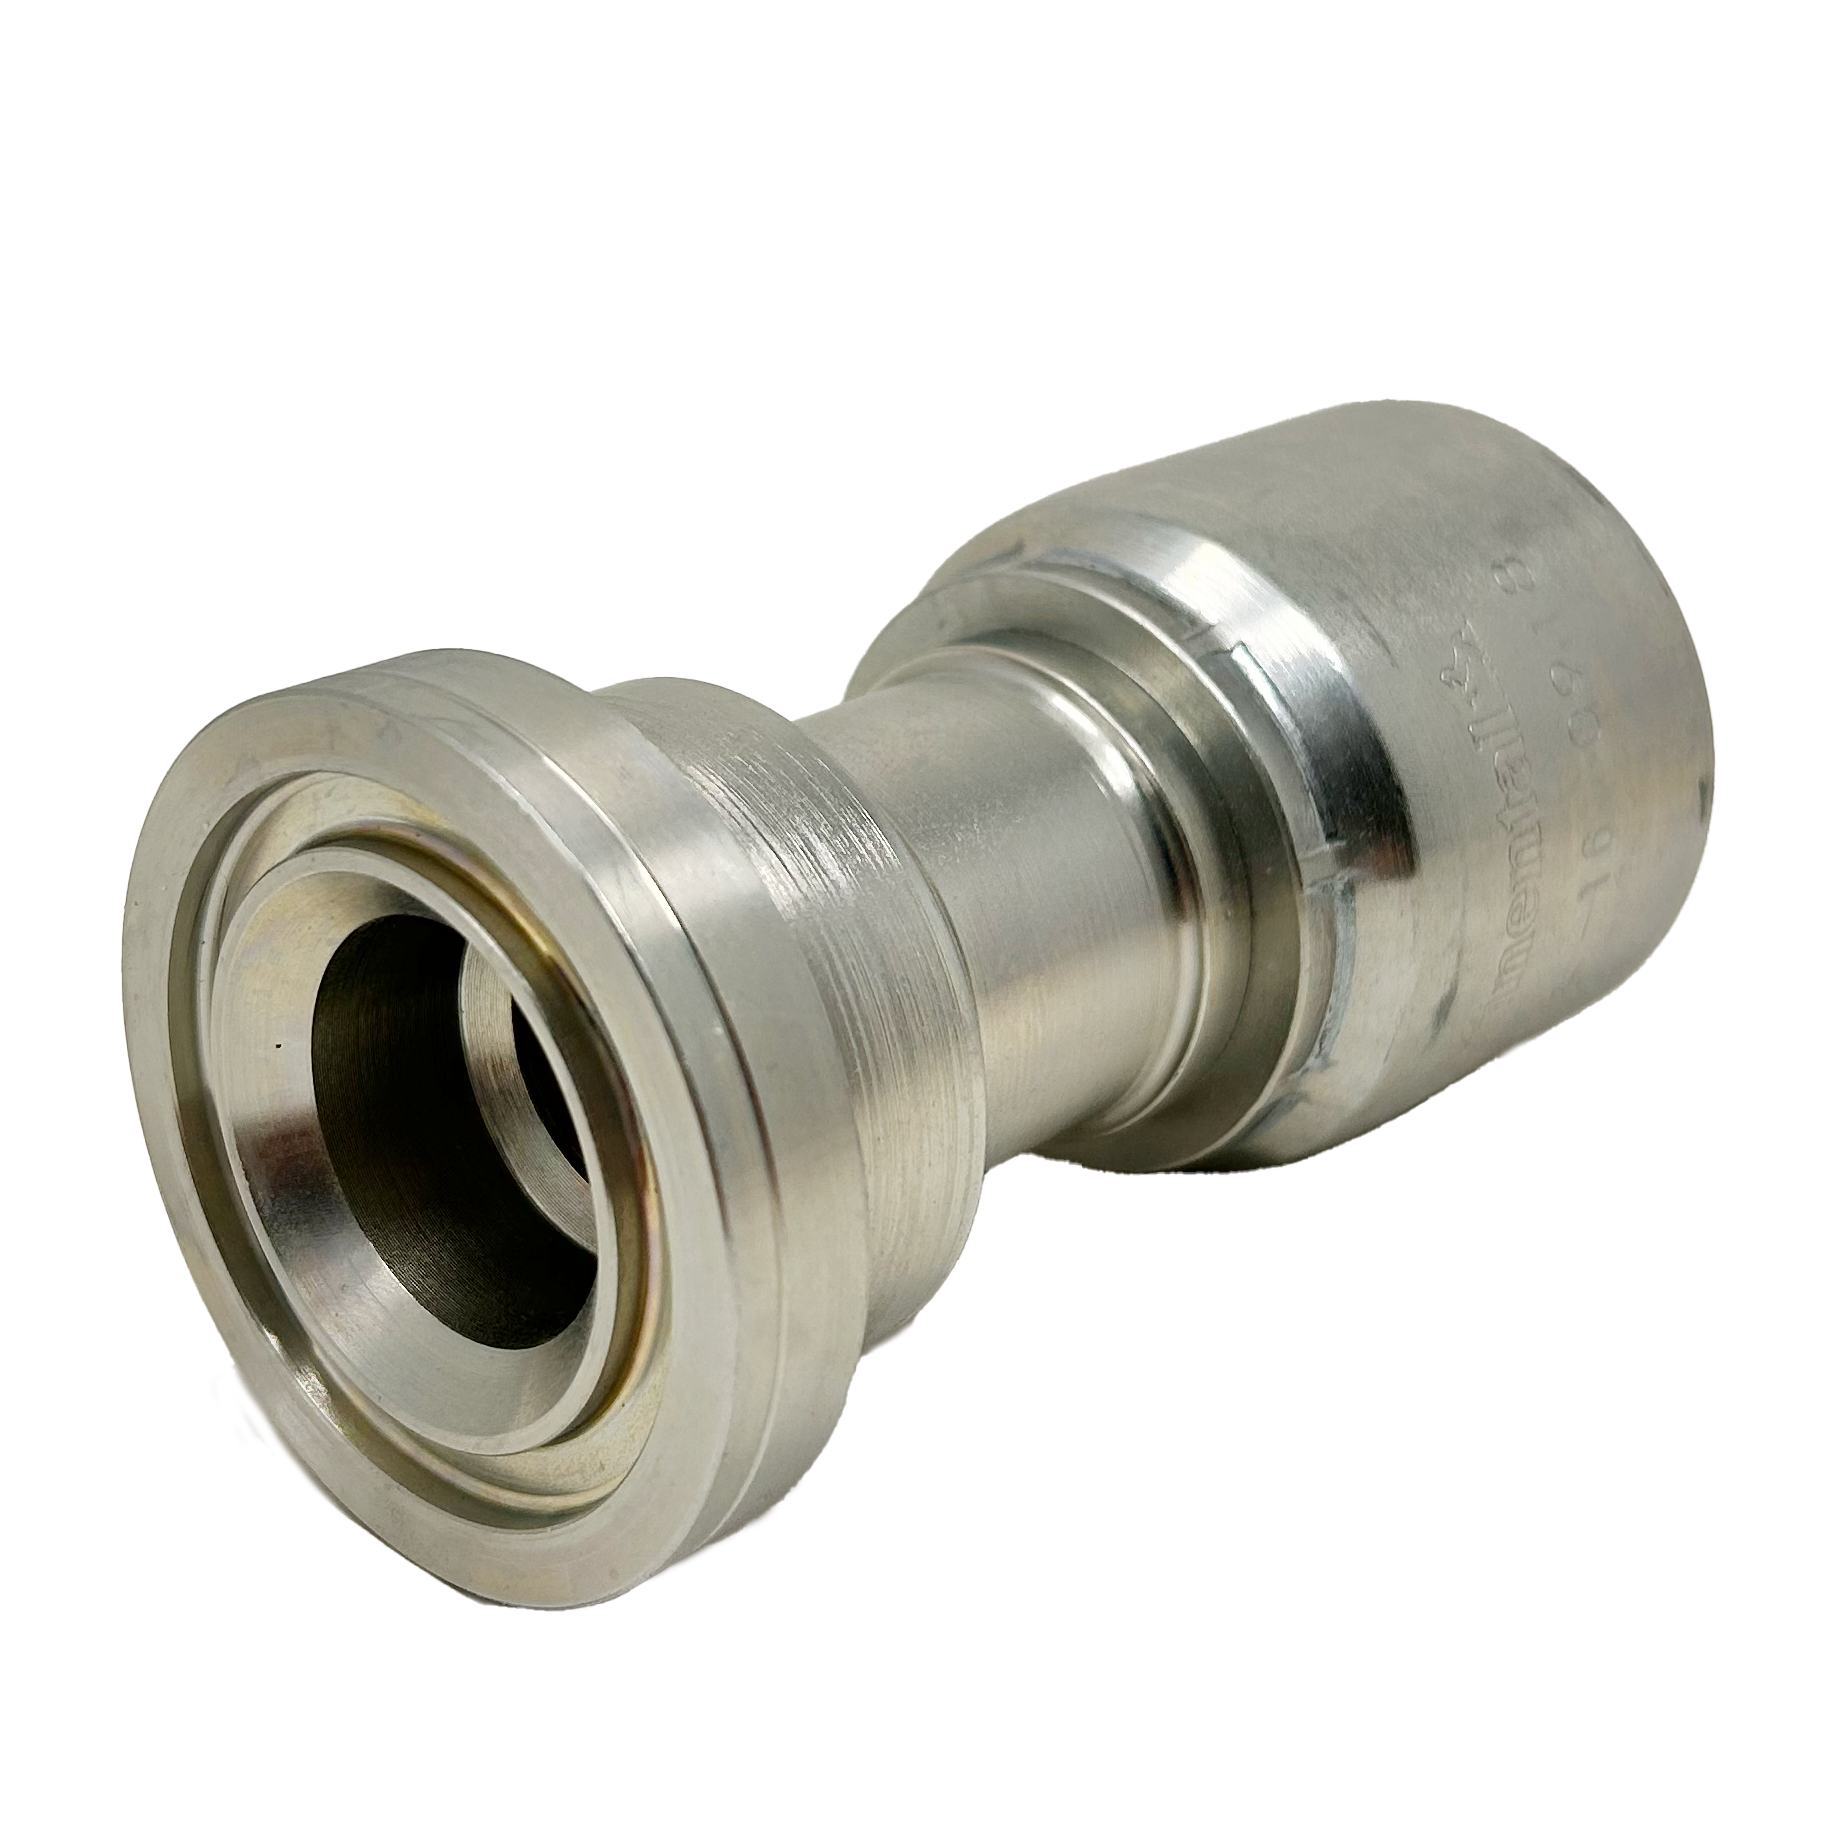 B2-FH-2016: Continental Hose Fitting, 1.25 (1-1/4") Hose ID x 1" Code 62, Straight Connection